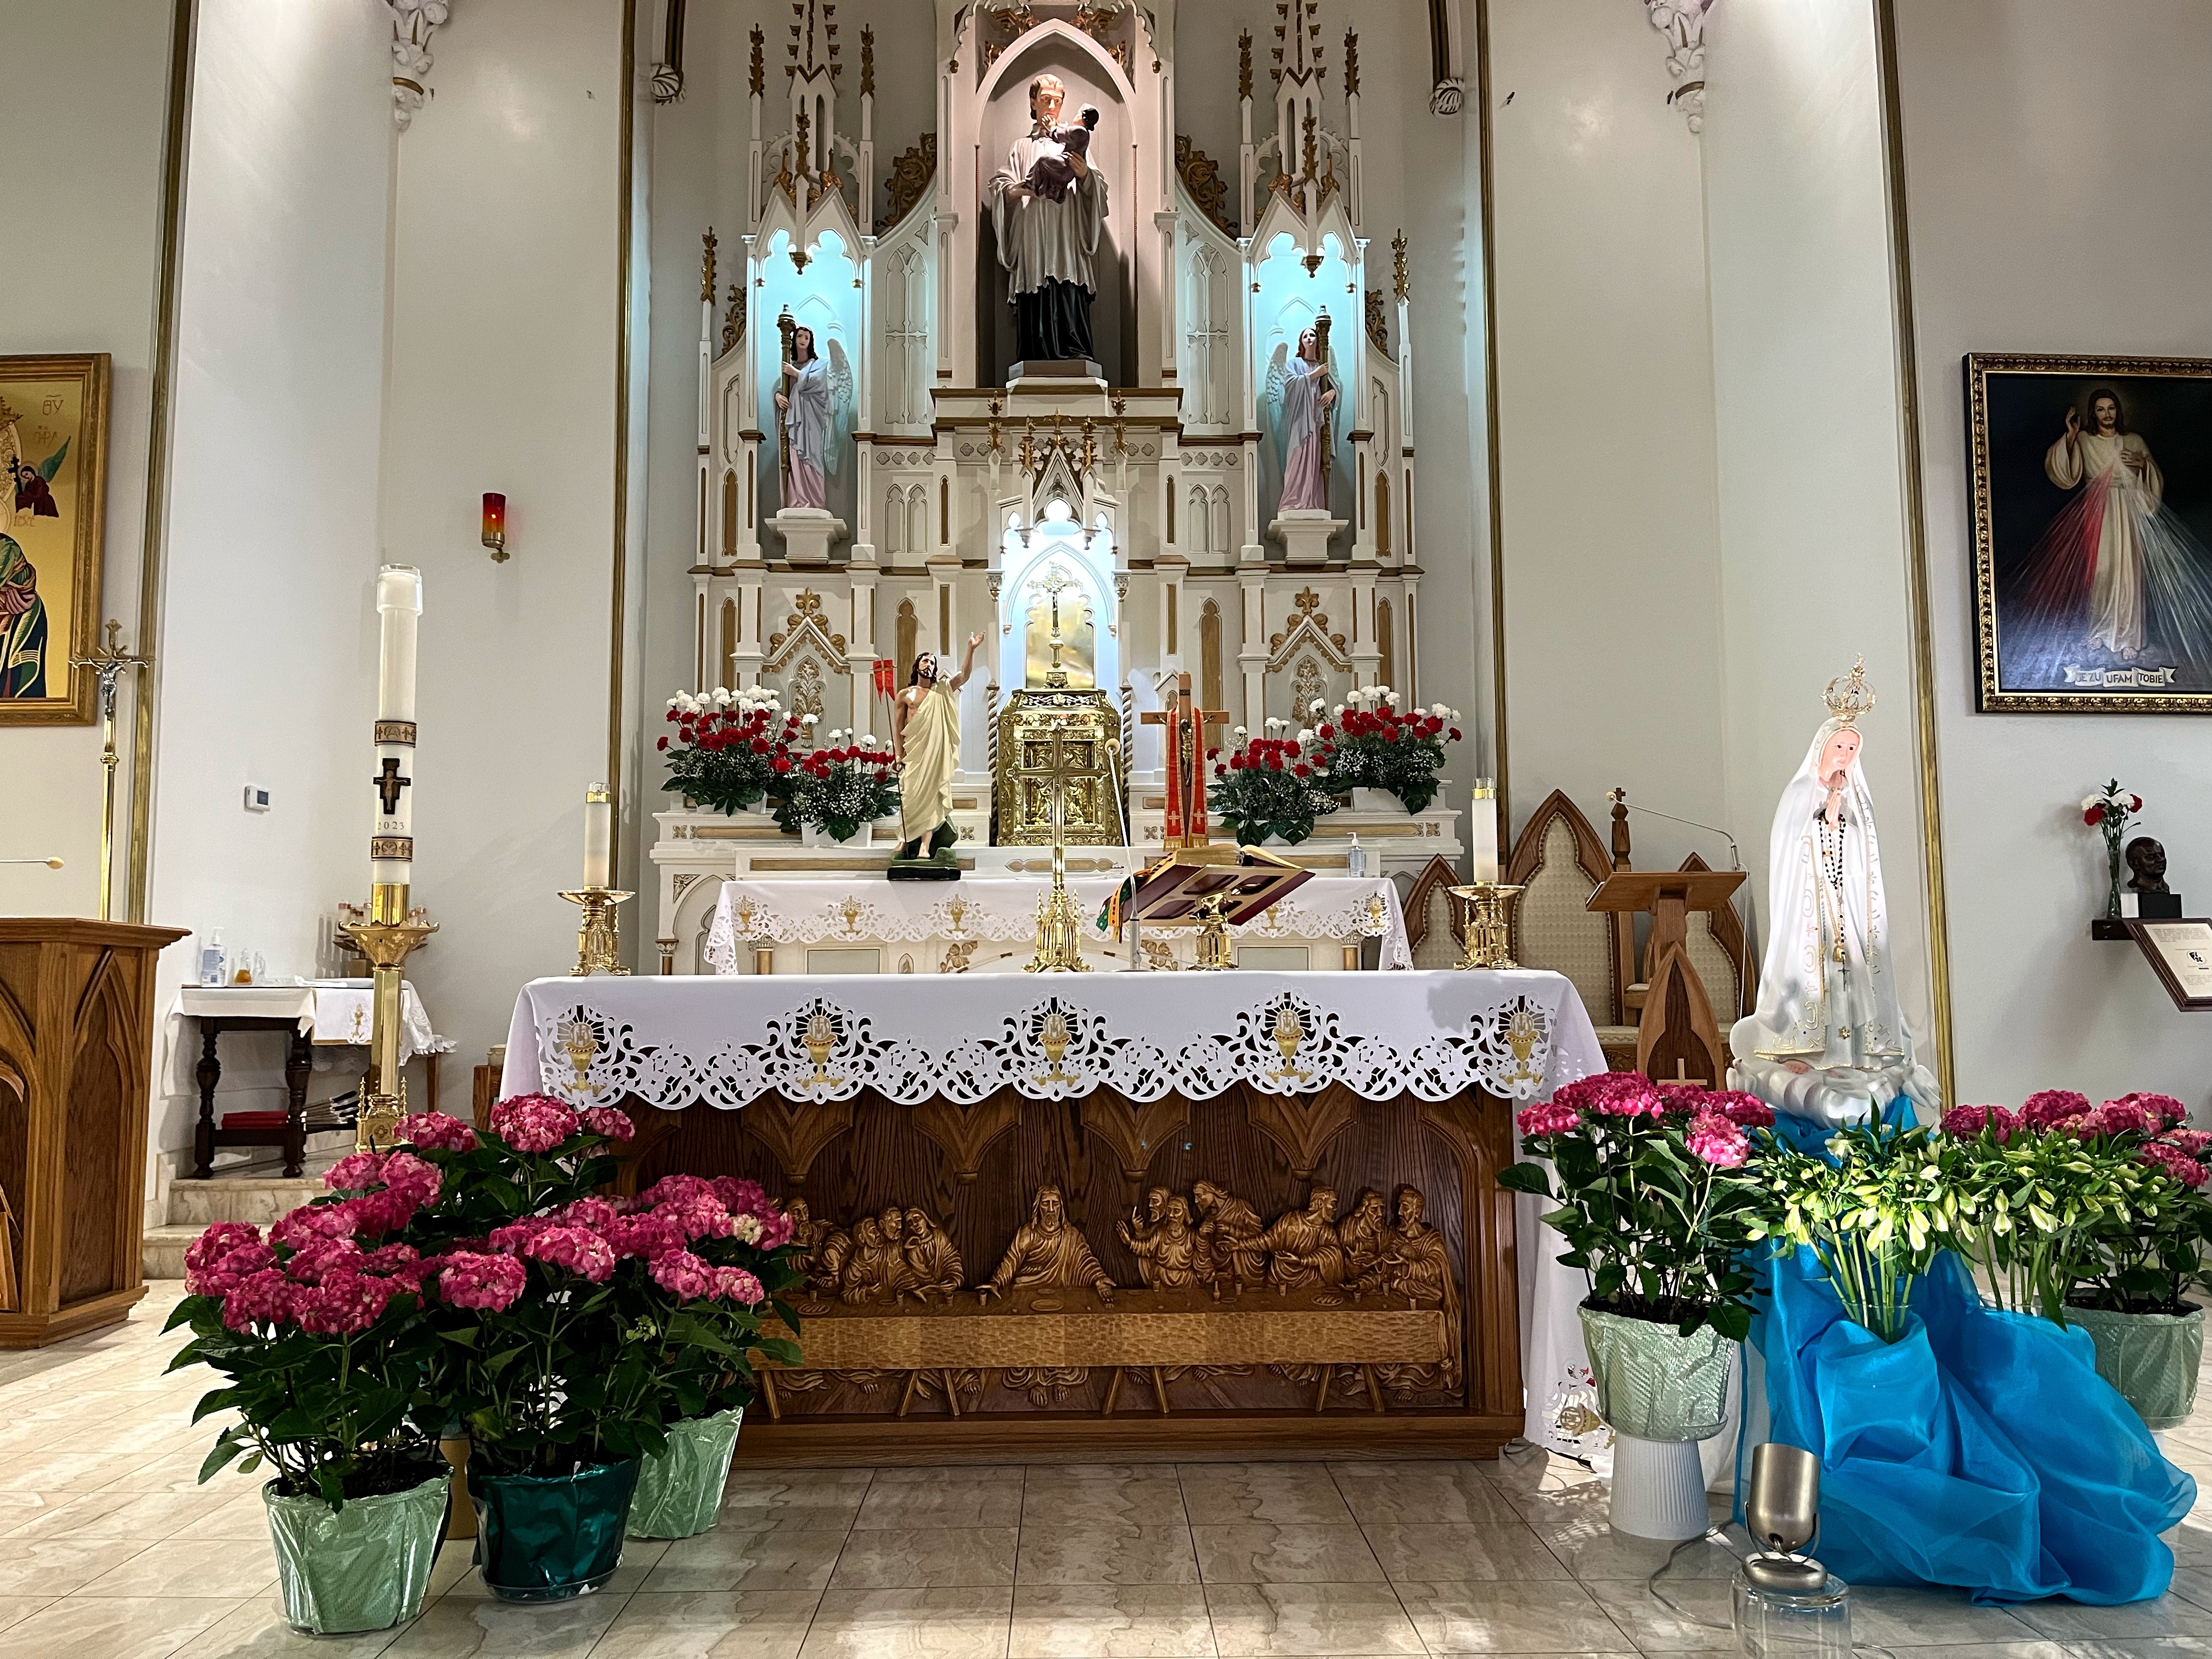 The view of the main altar